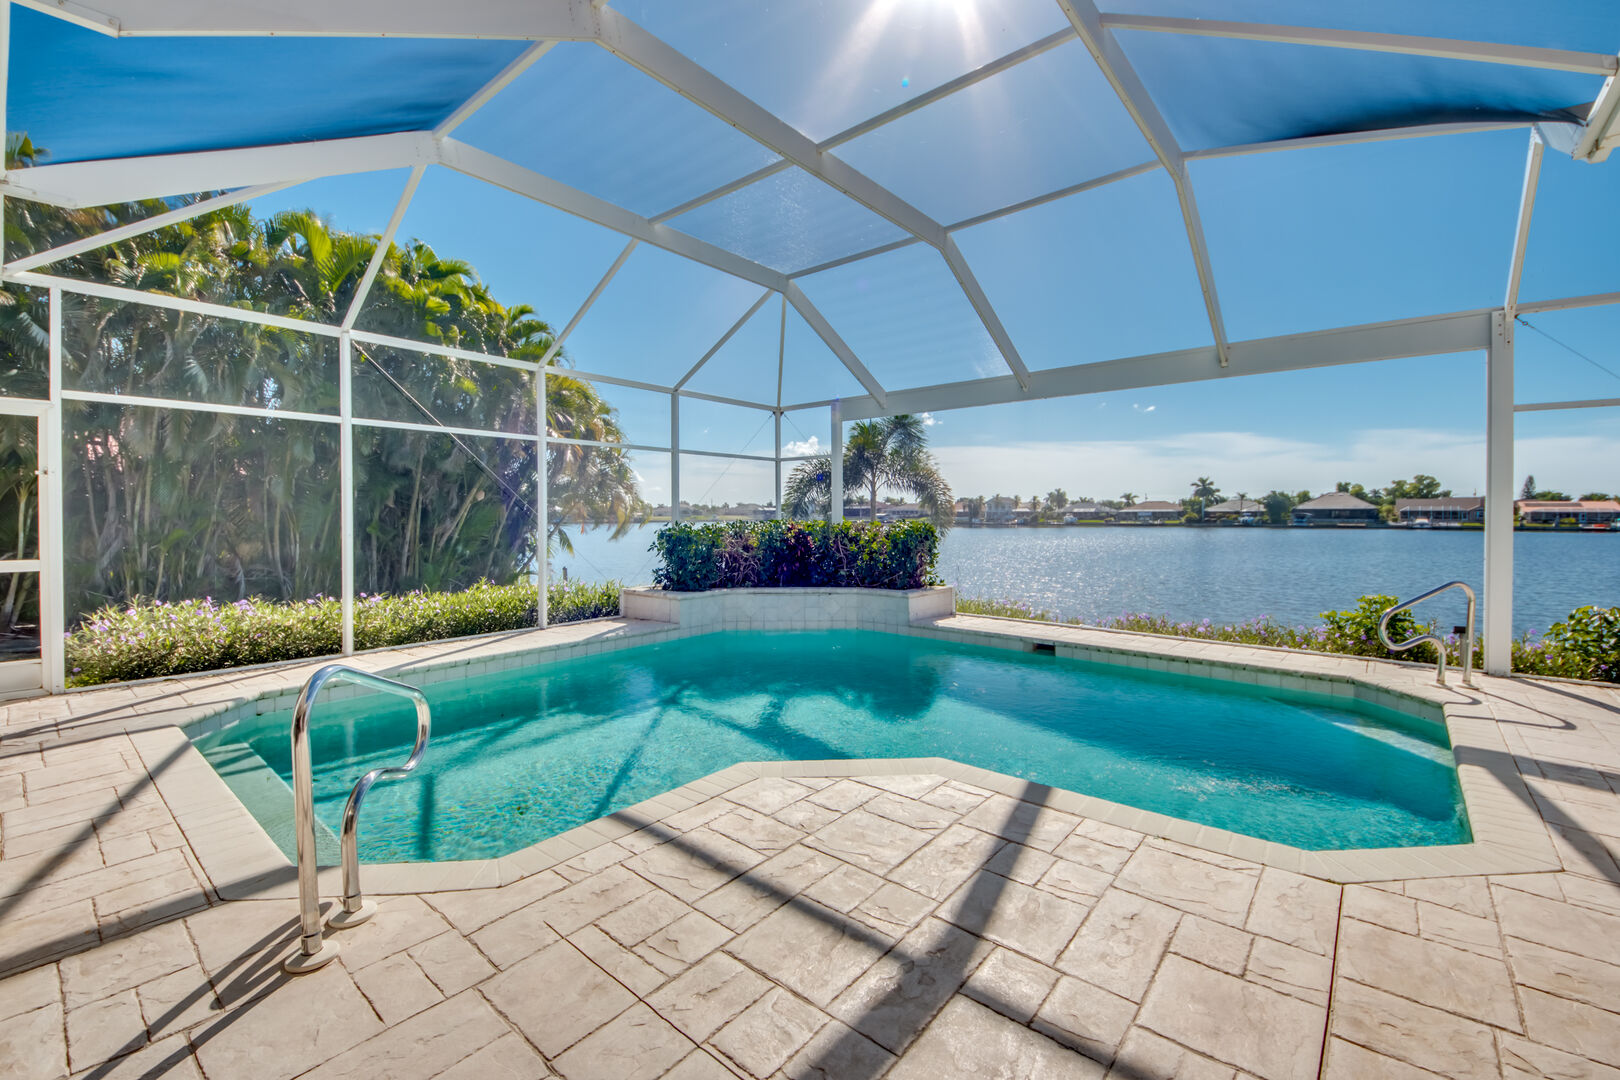 Southern facing pool Cape Coral FL